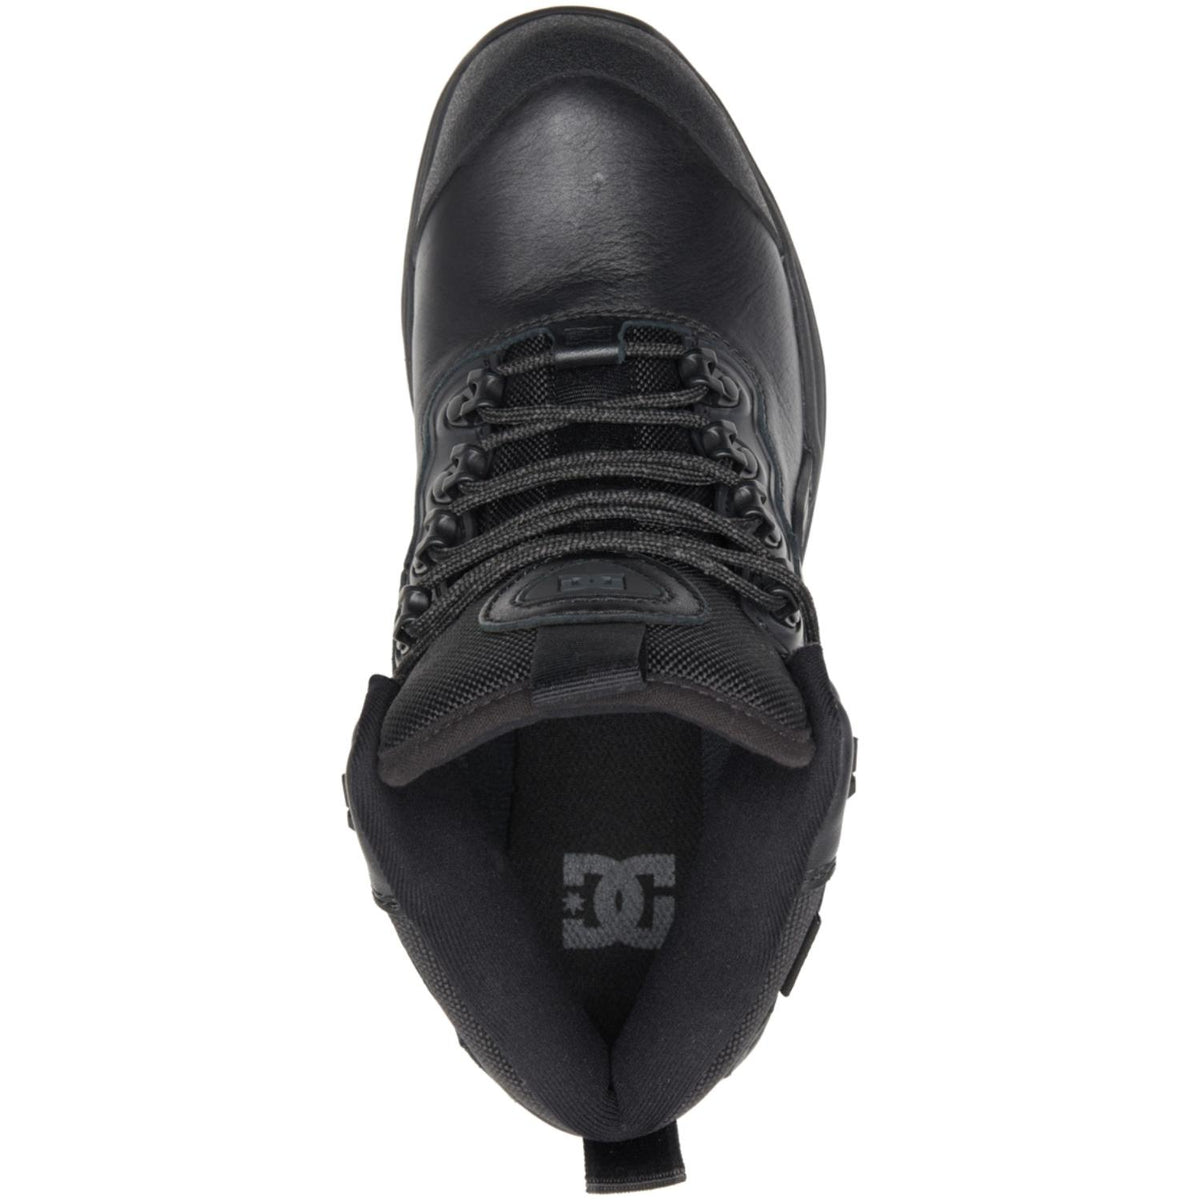 DC Navigator LX Leather Boots - Black/Black - Mens Boots by DC